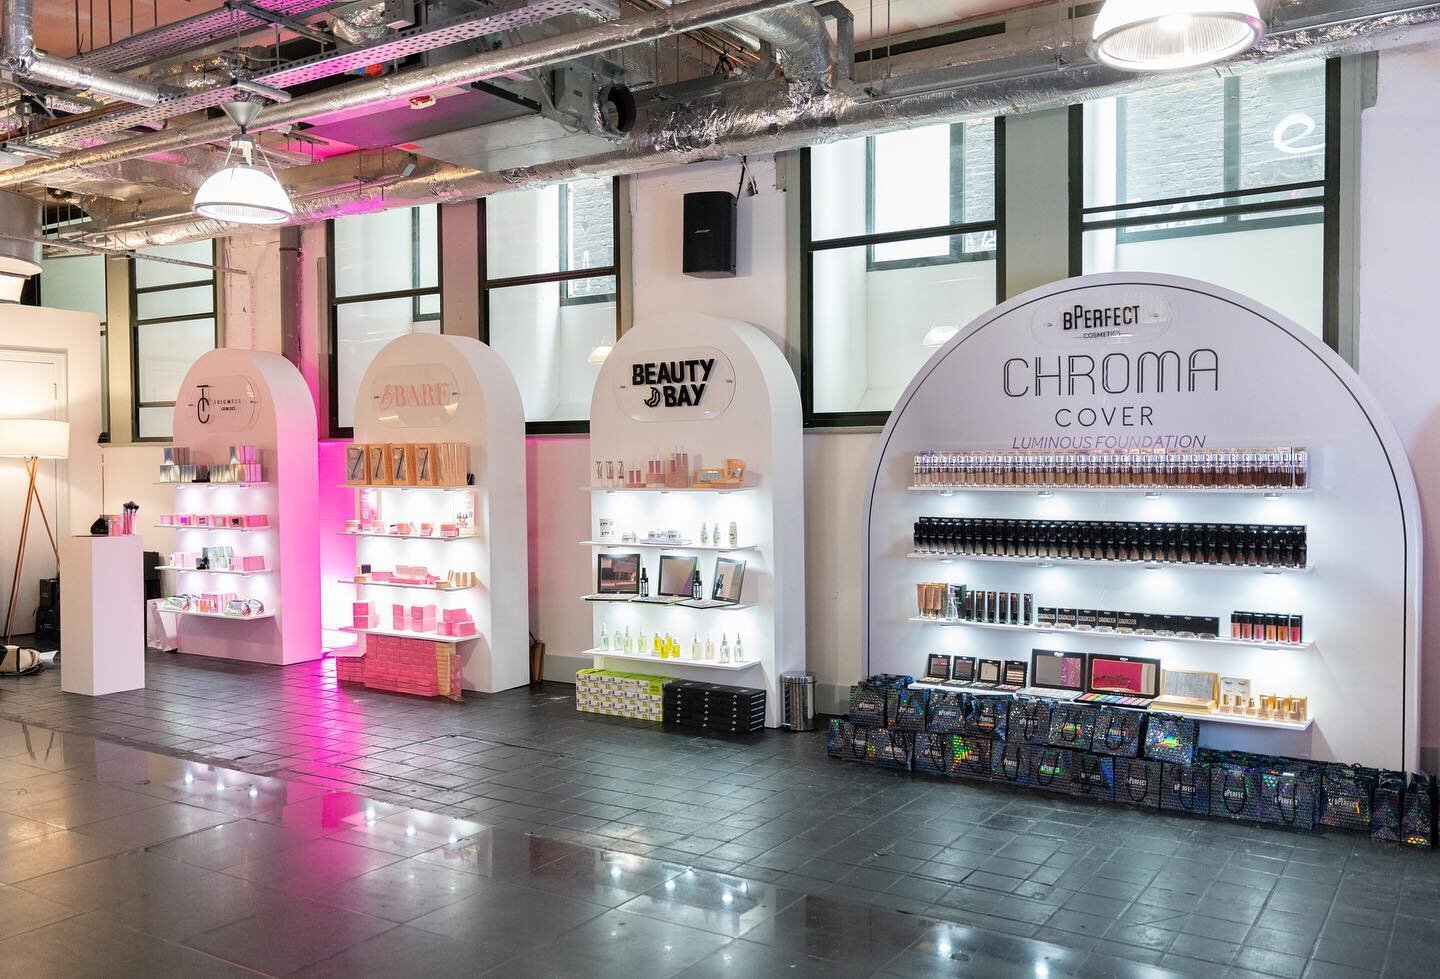 Earlier this week, we took over the lower level of the beautiful Alan Hotel in Manchester to host a TikTok Shop experience IRL. Beauty brands were invited to showcase their products. Wonderland designed a tiered offering of branded showcases that bra